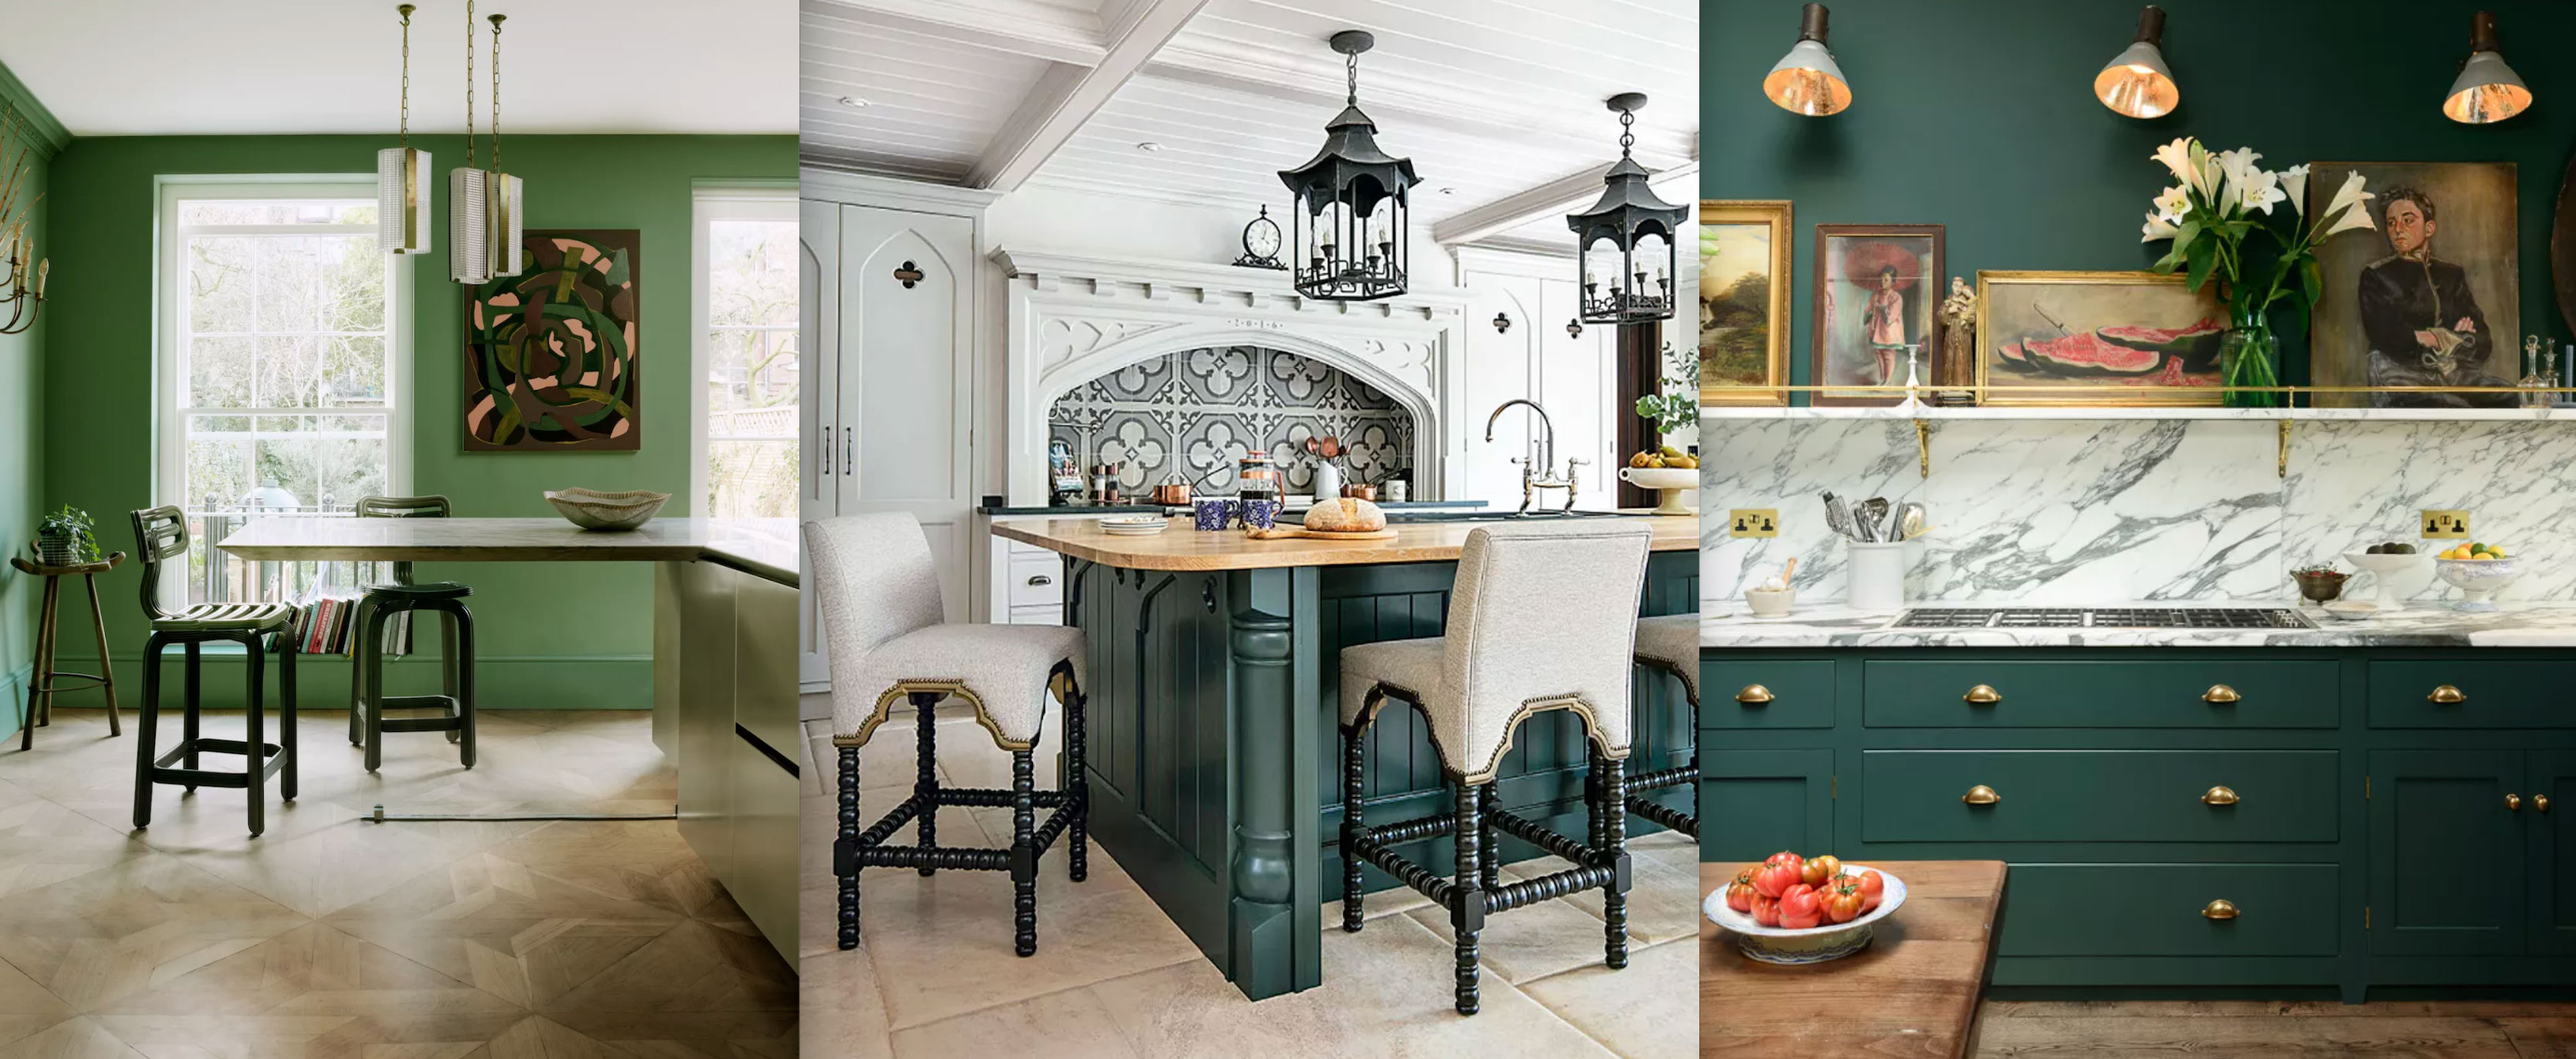 Green kitchen ideas 20 kitchens in sage, olive and apple  